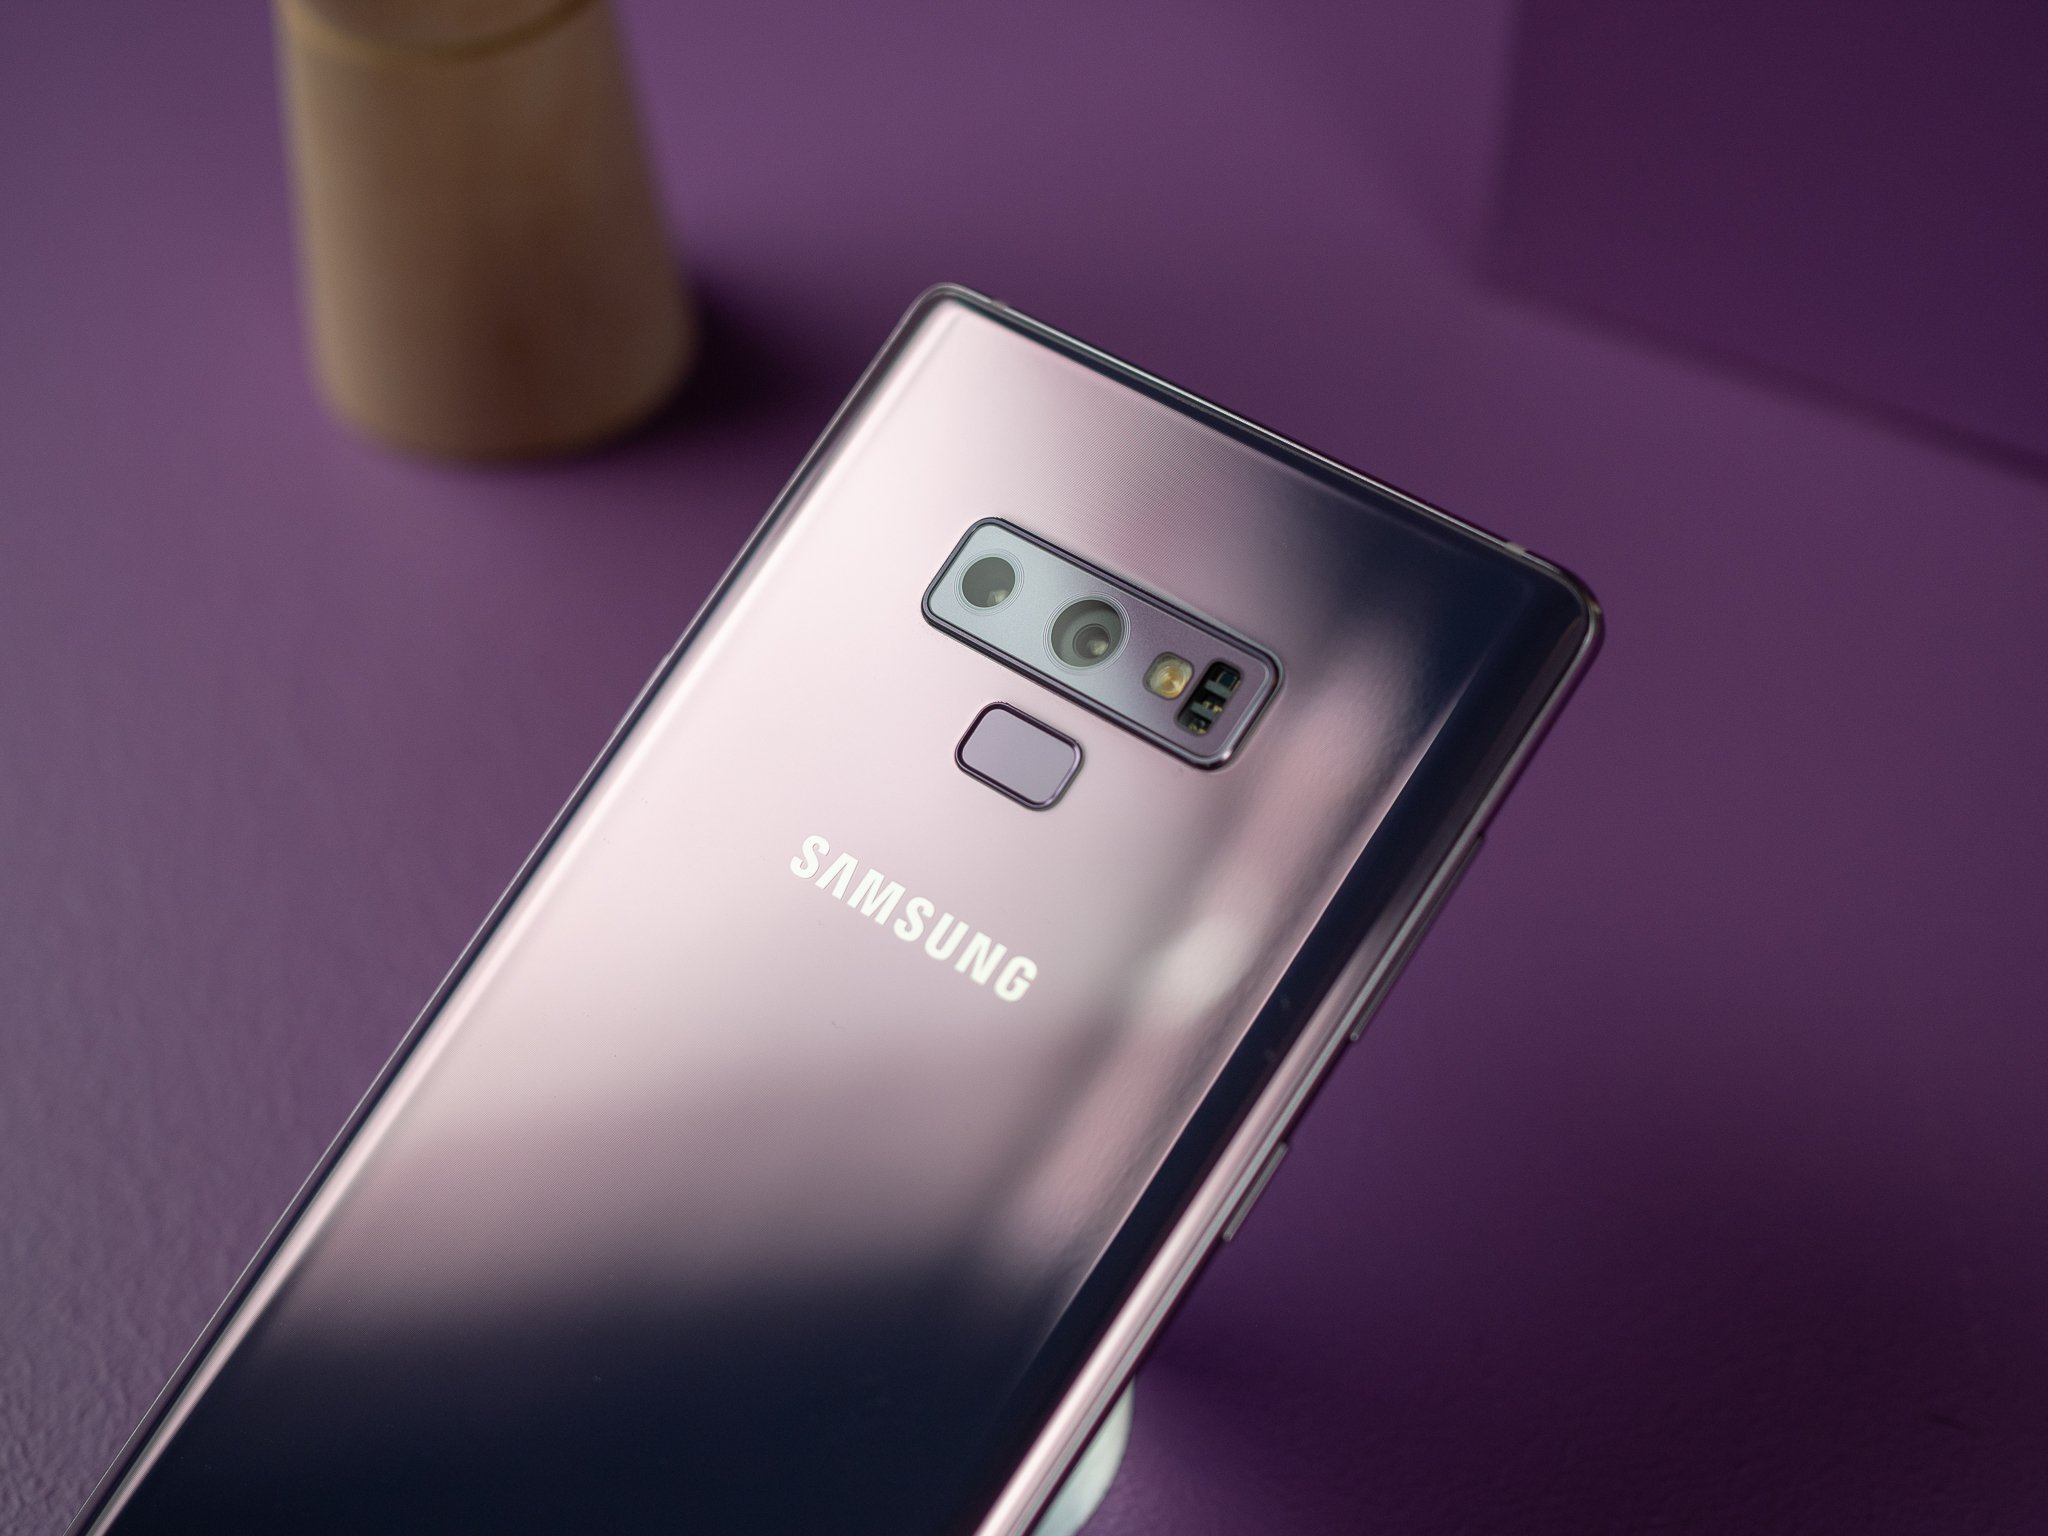 The Exynos version of the Samsung Galaxy Note 9 is down to $867 on